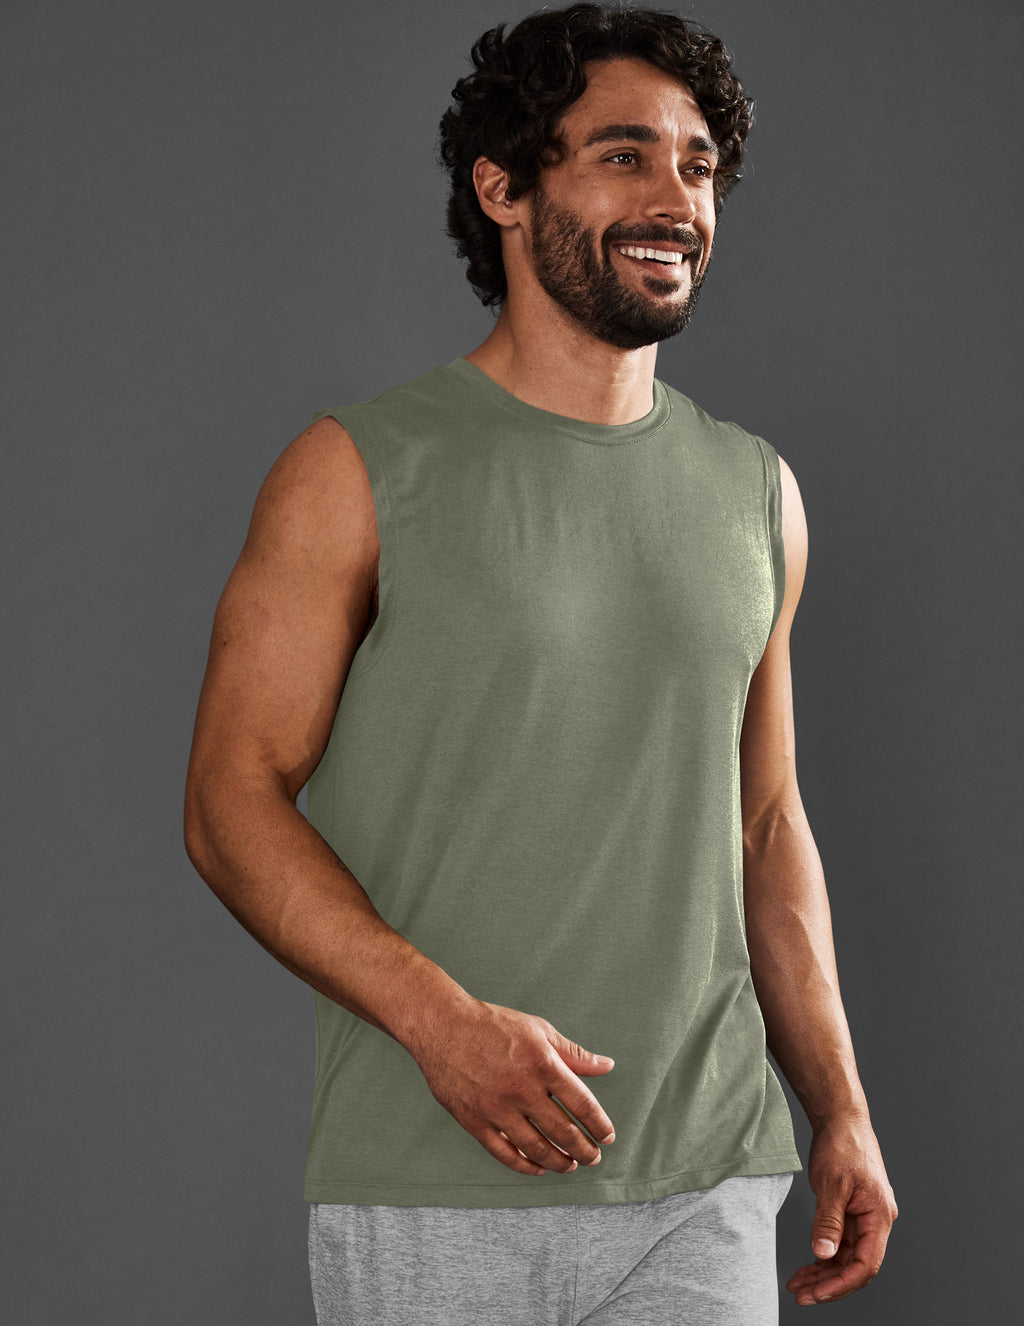 Featherweight Freeflo Men's Muscle Tank Featured Image